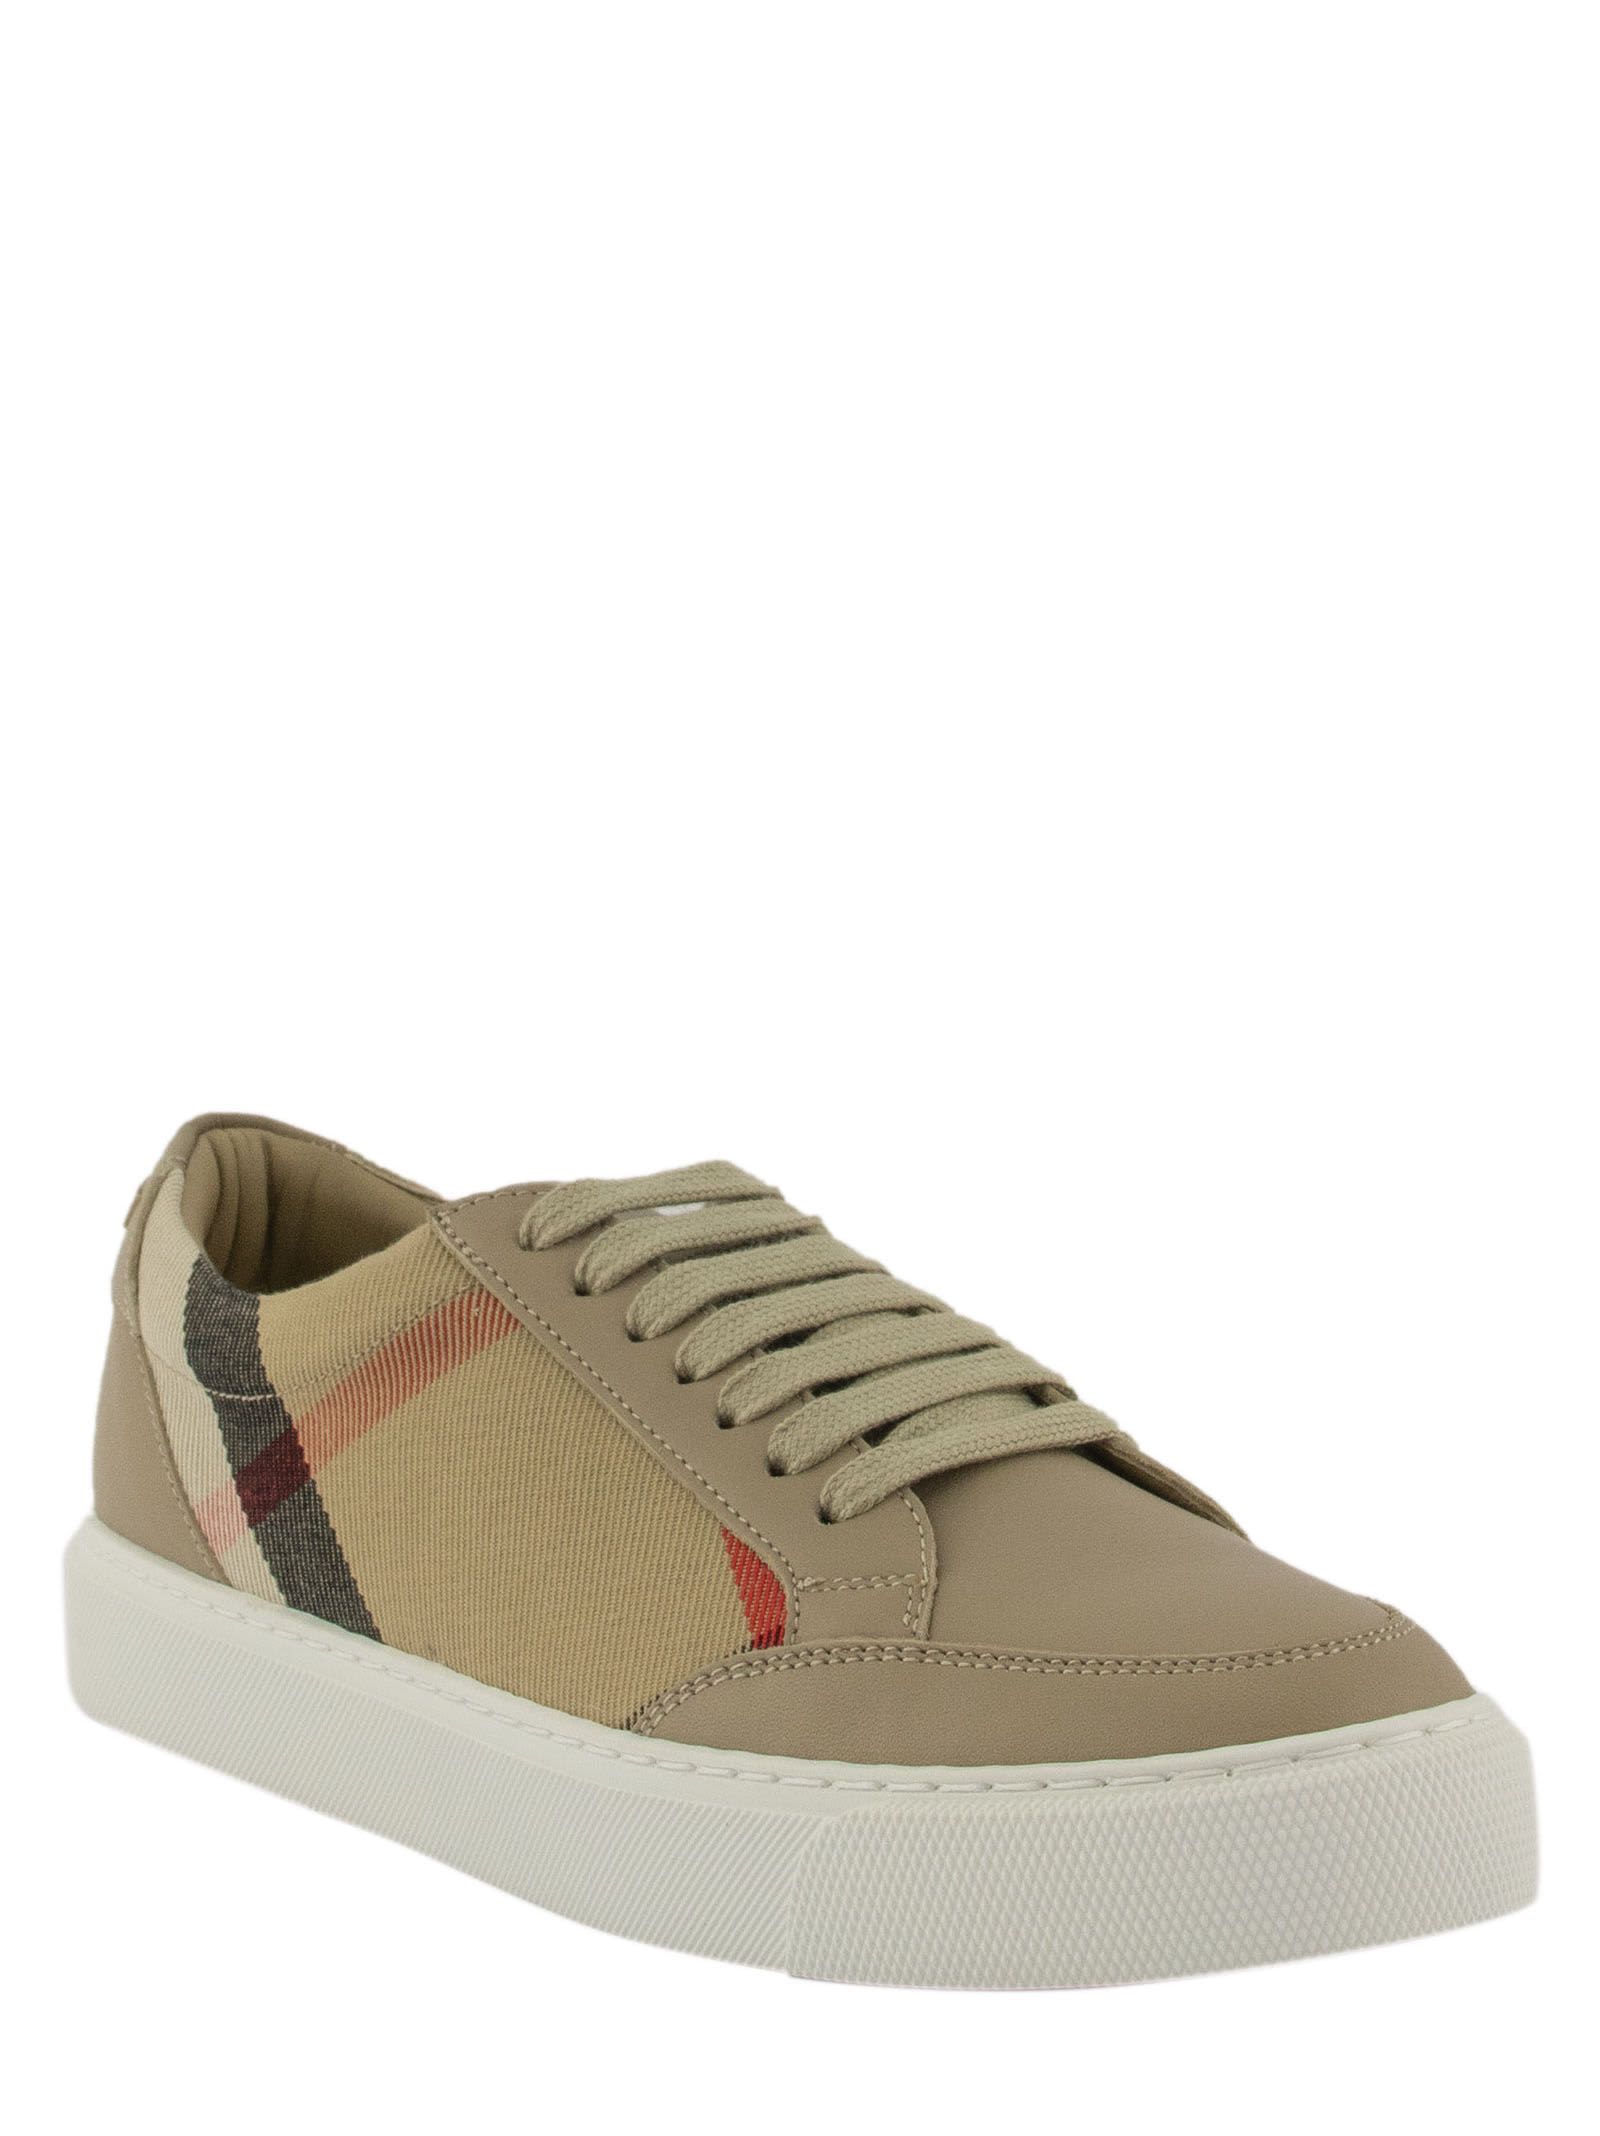 burberry house check and leather sneakers